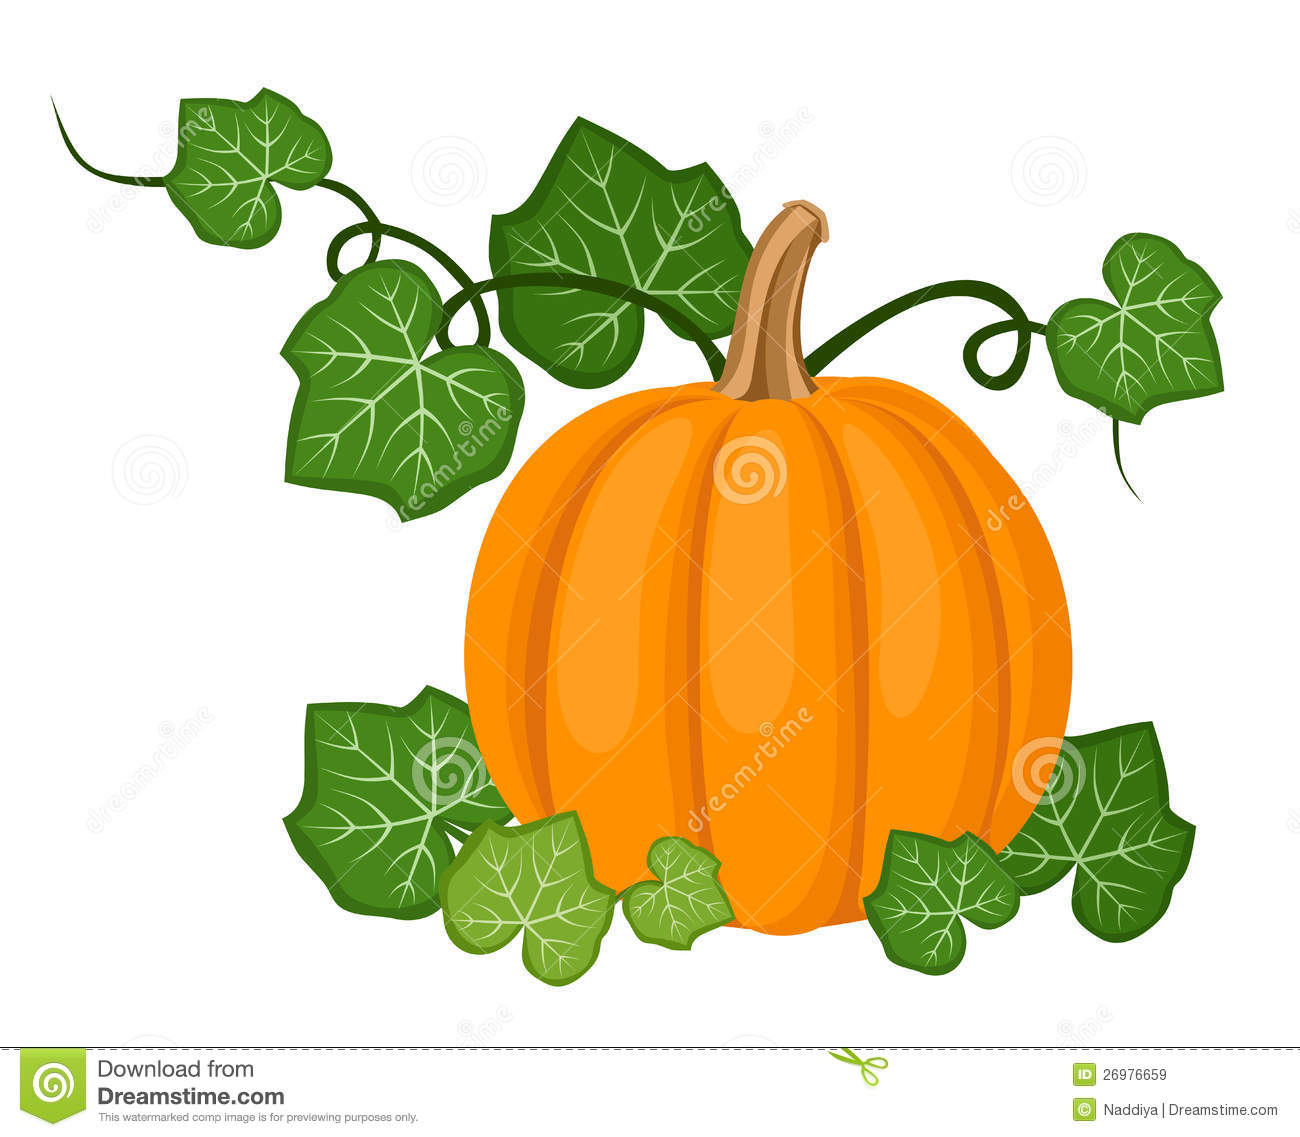 Vector Illustration Of Orange Pumpkin With Leaves Isolated On A White